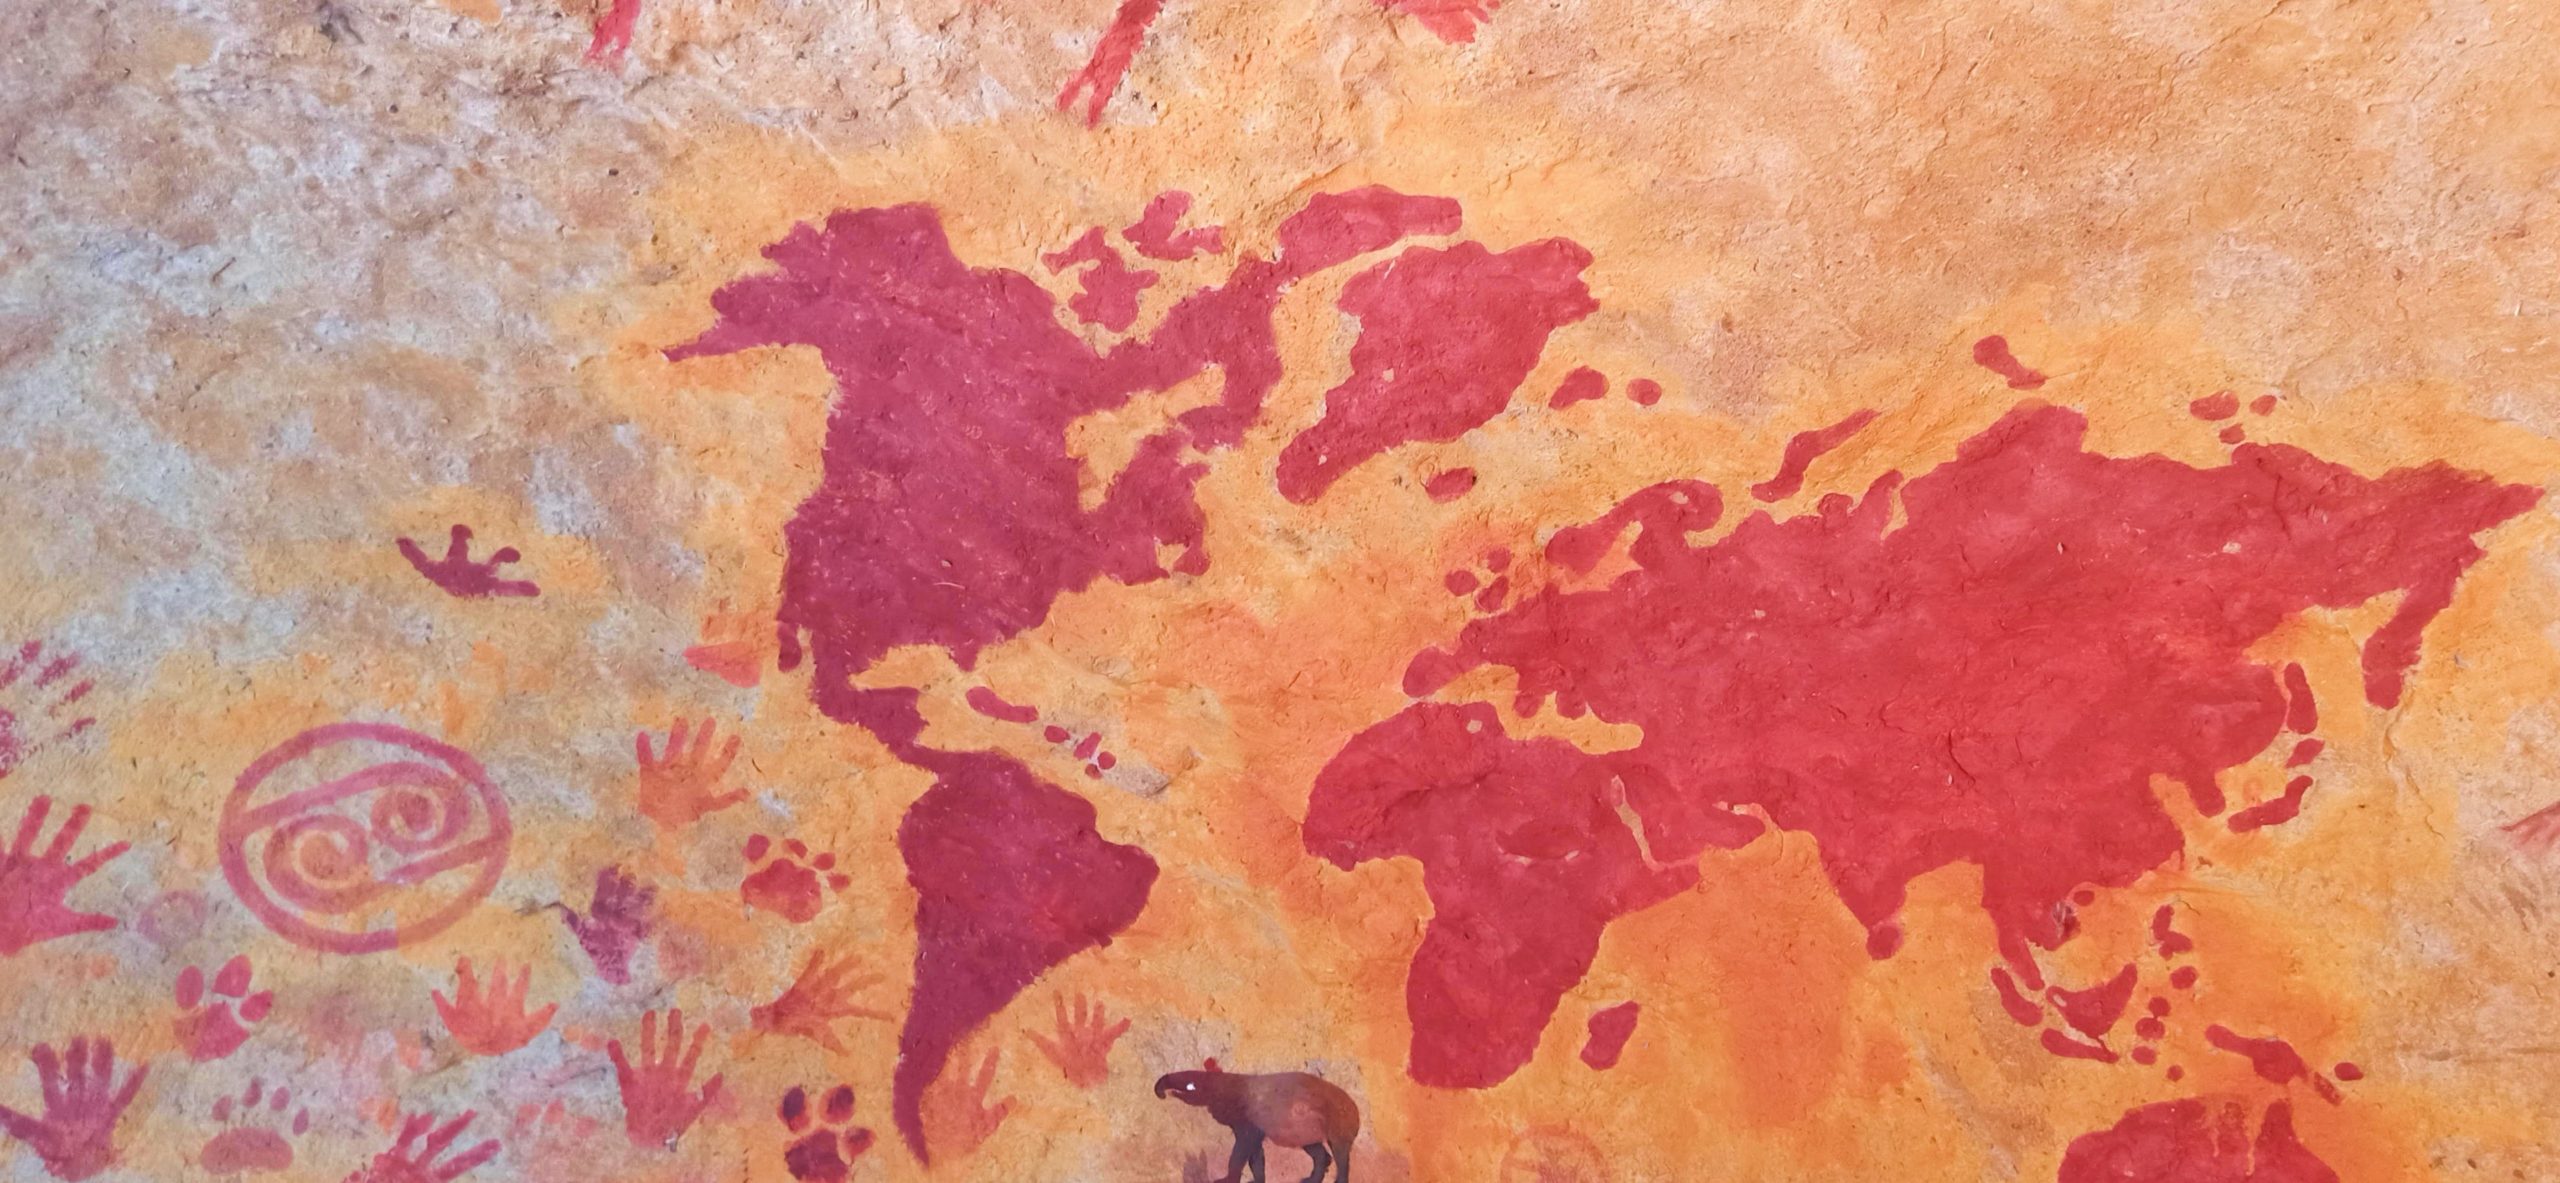 Picture of a map of the World